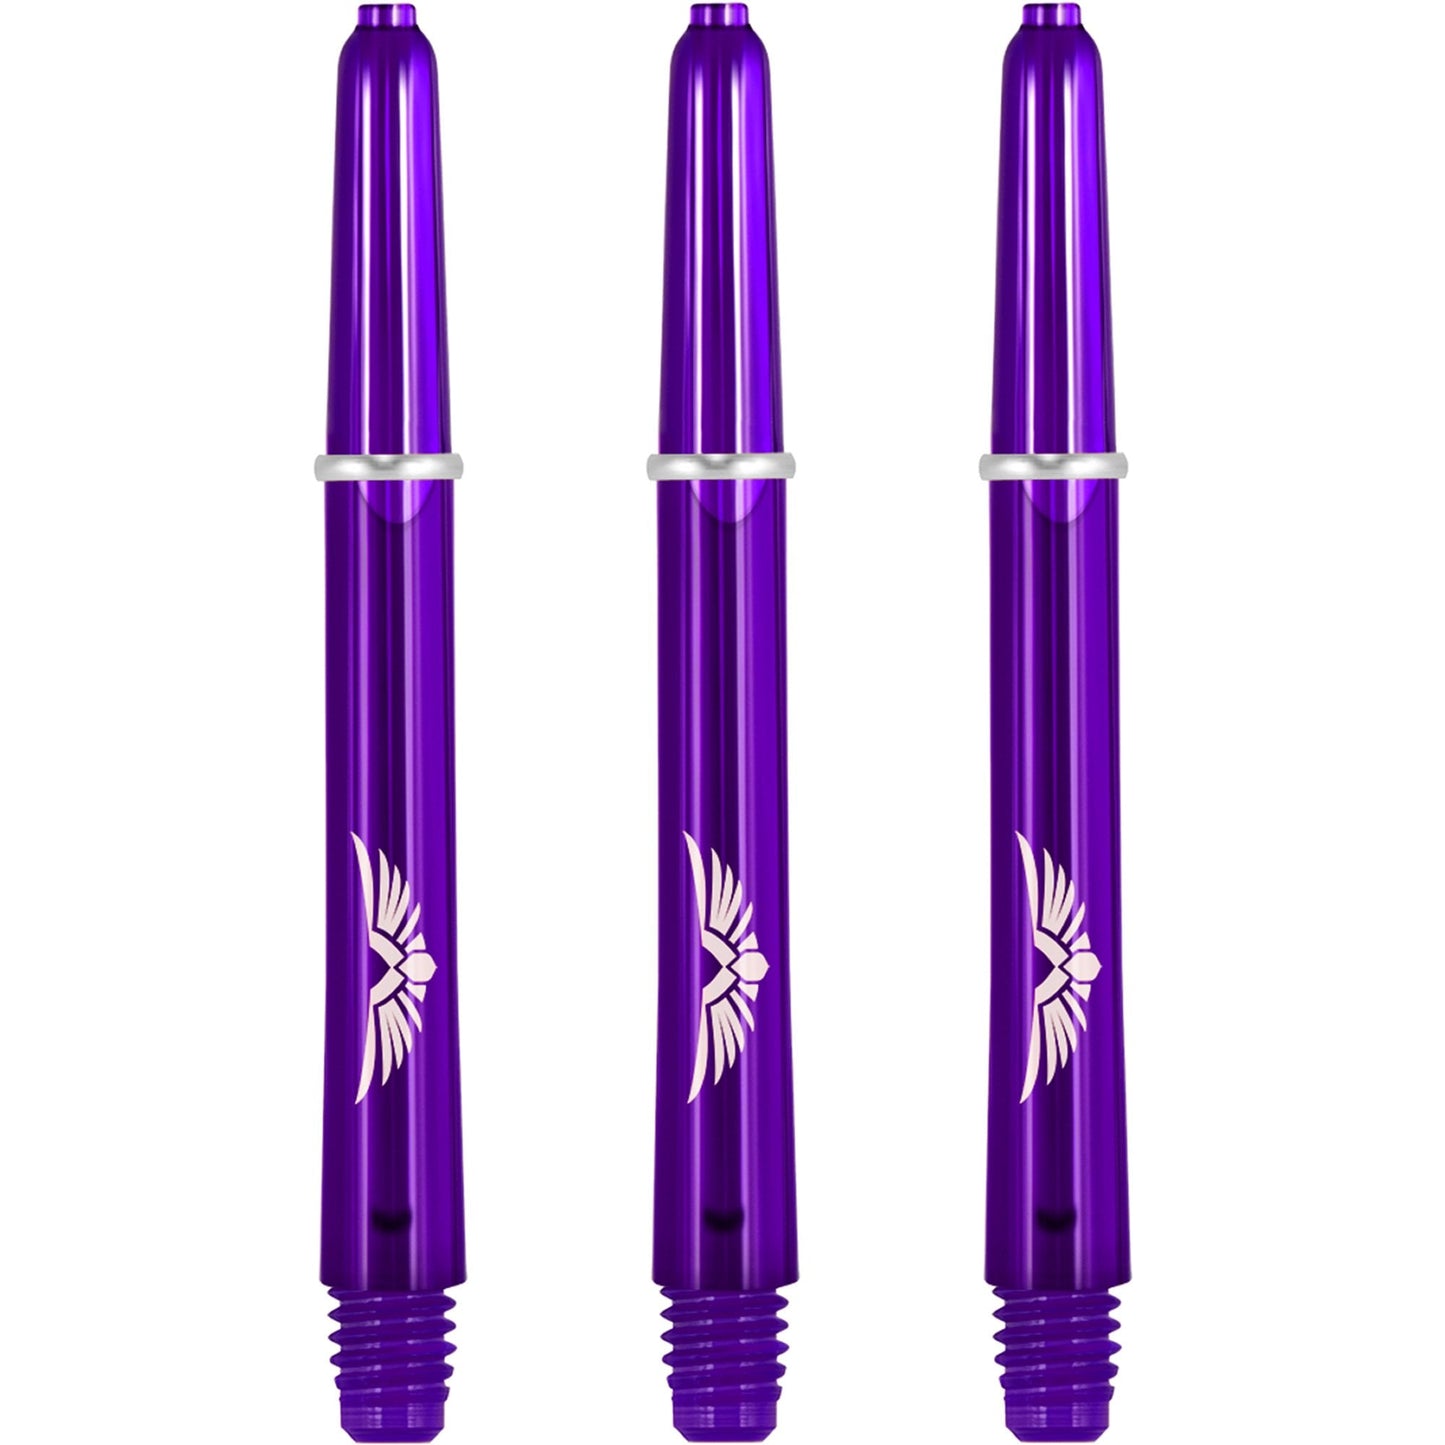 Shot Eagle Claw Dart Shafts - with Machined Rings - Strong Polycarbonate Stems - Purple Medium